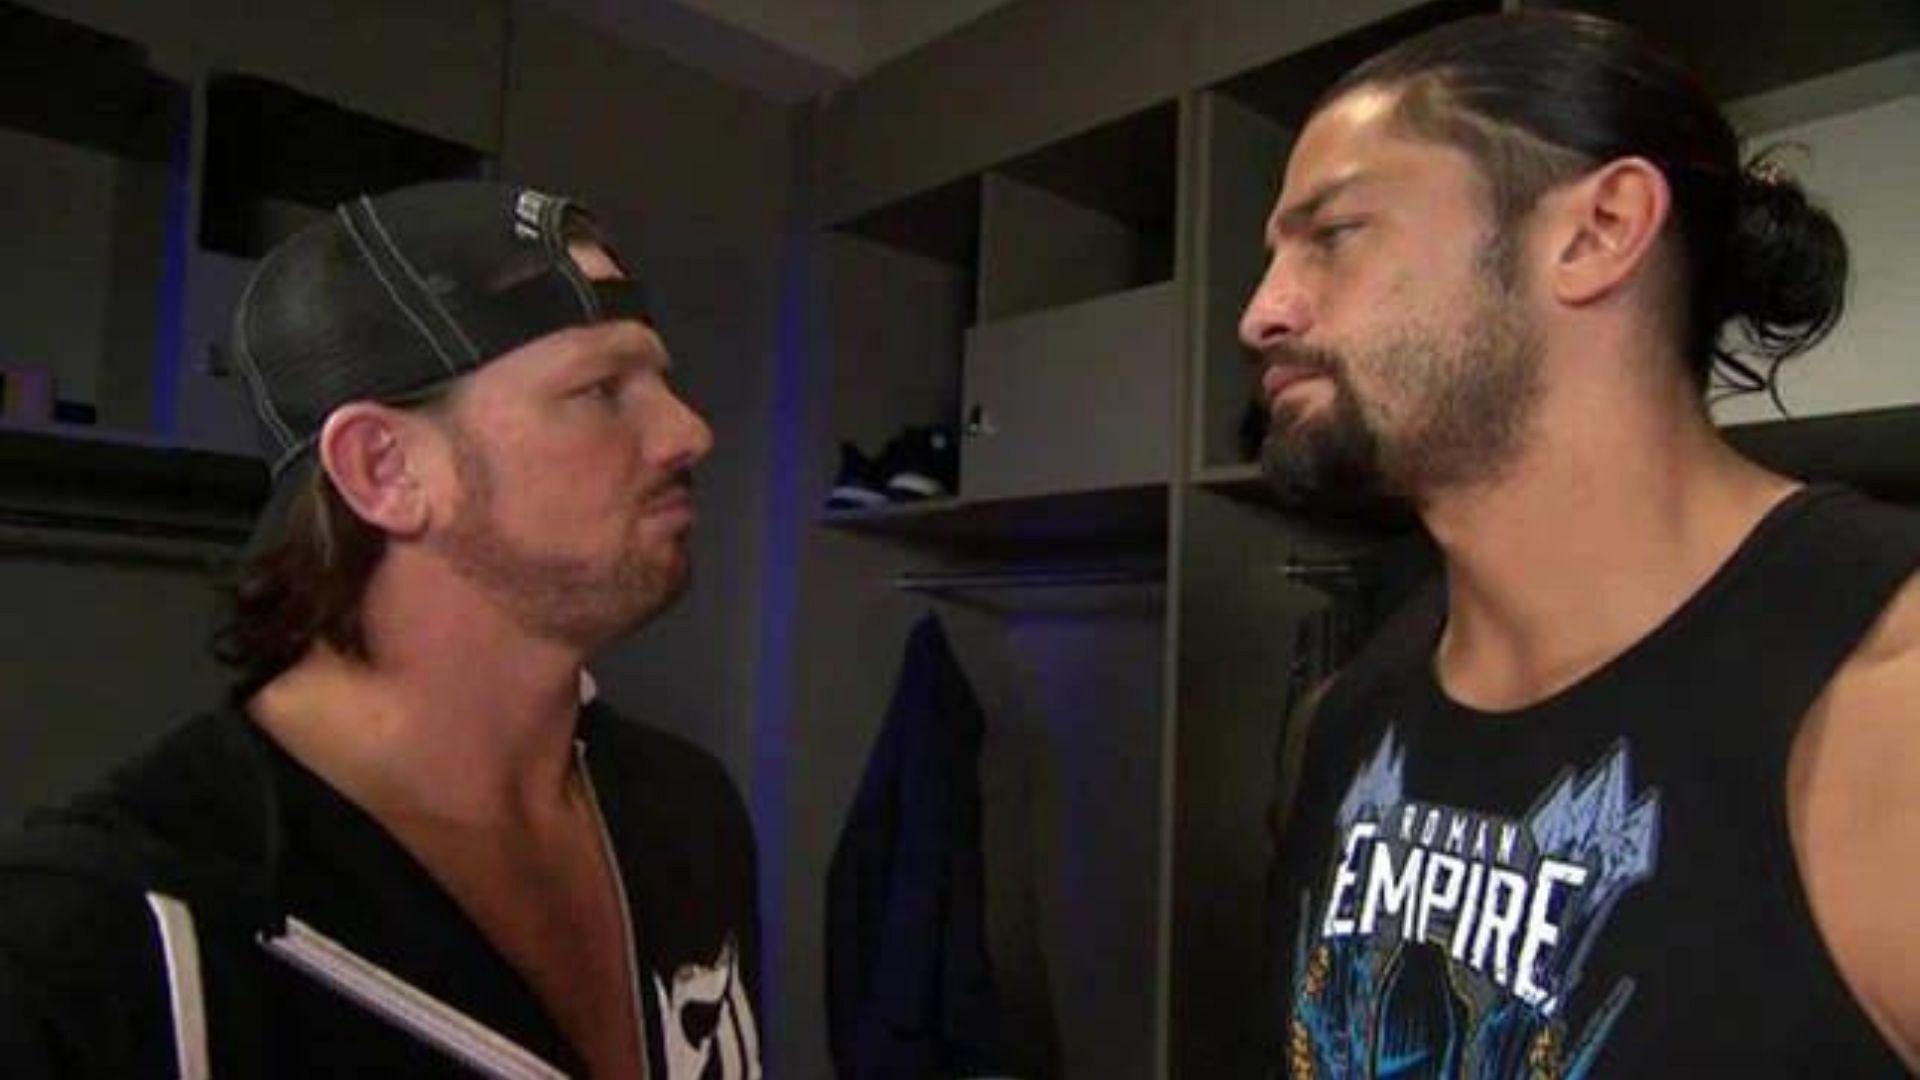 AJ Styles and Roman Reigns have faced each other in the past